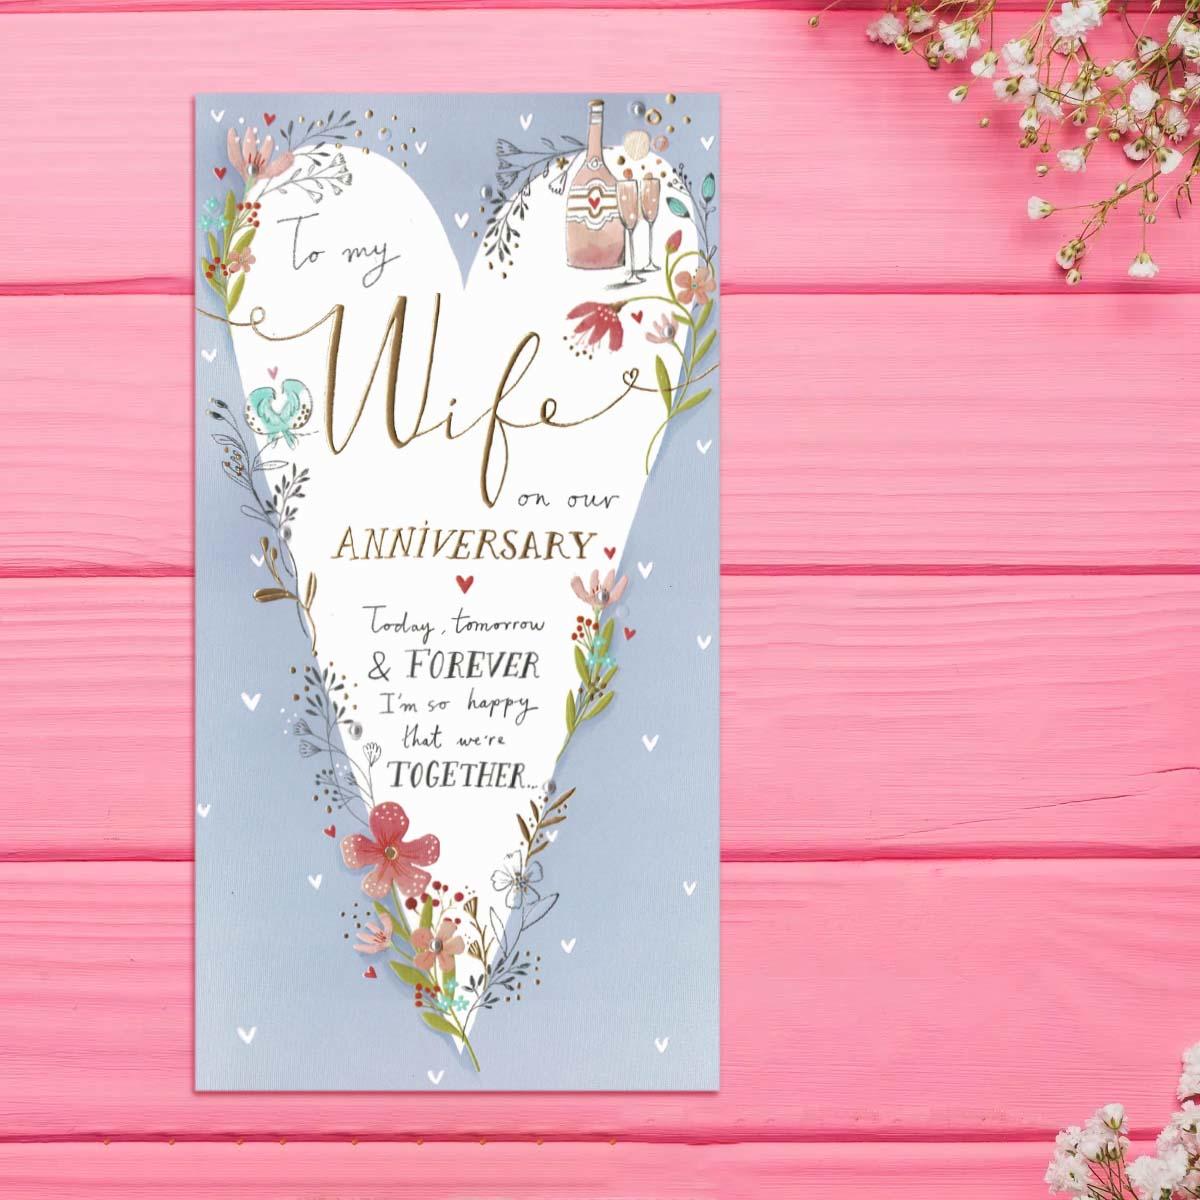 Wife Anniversary Card Featured In Full